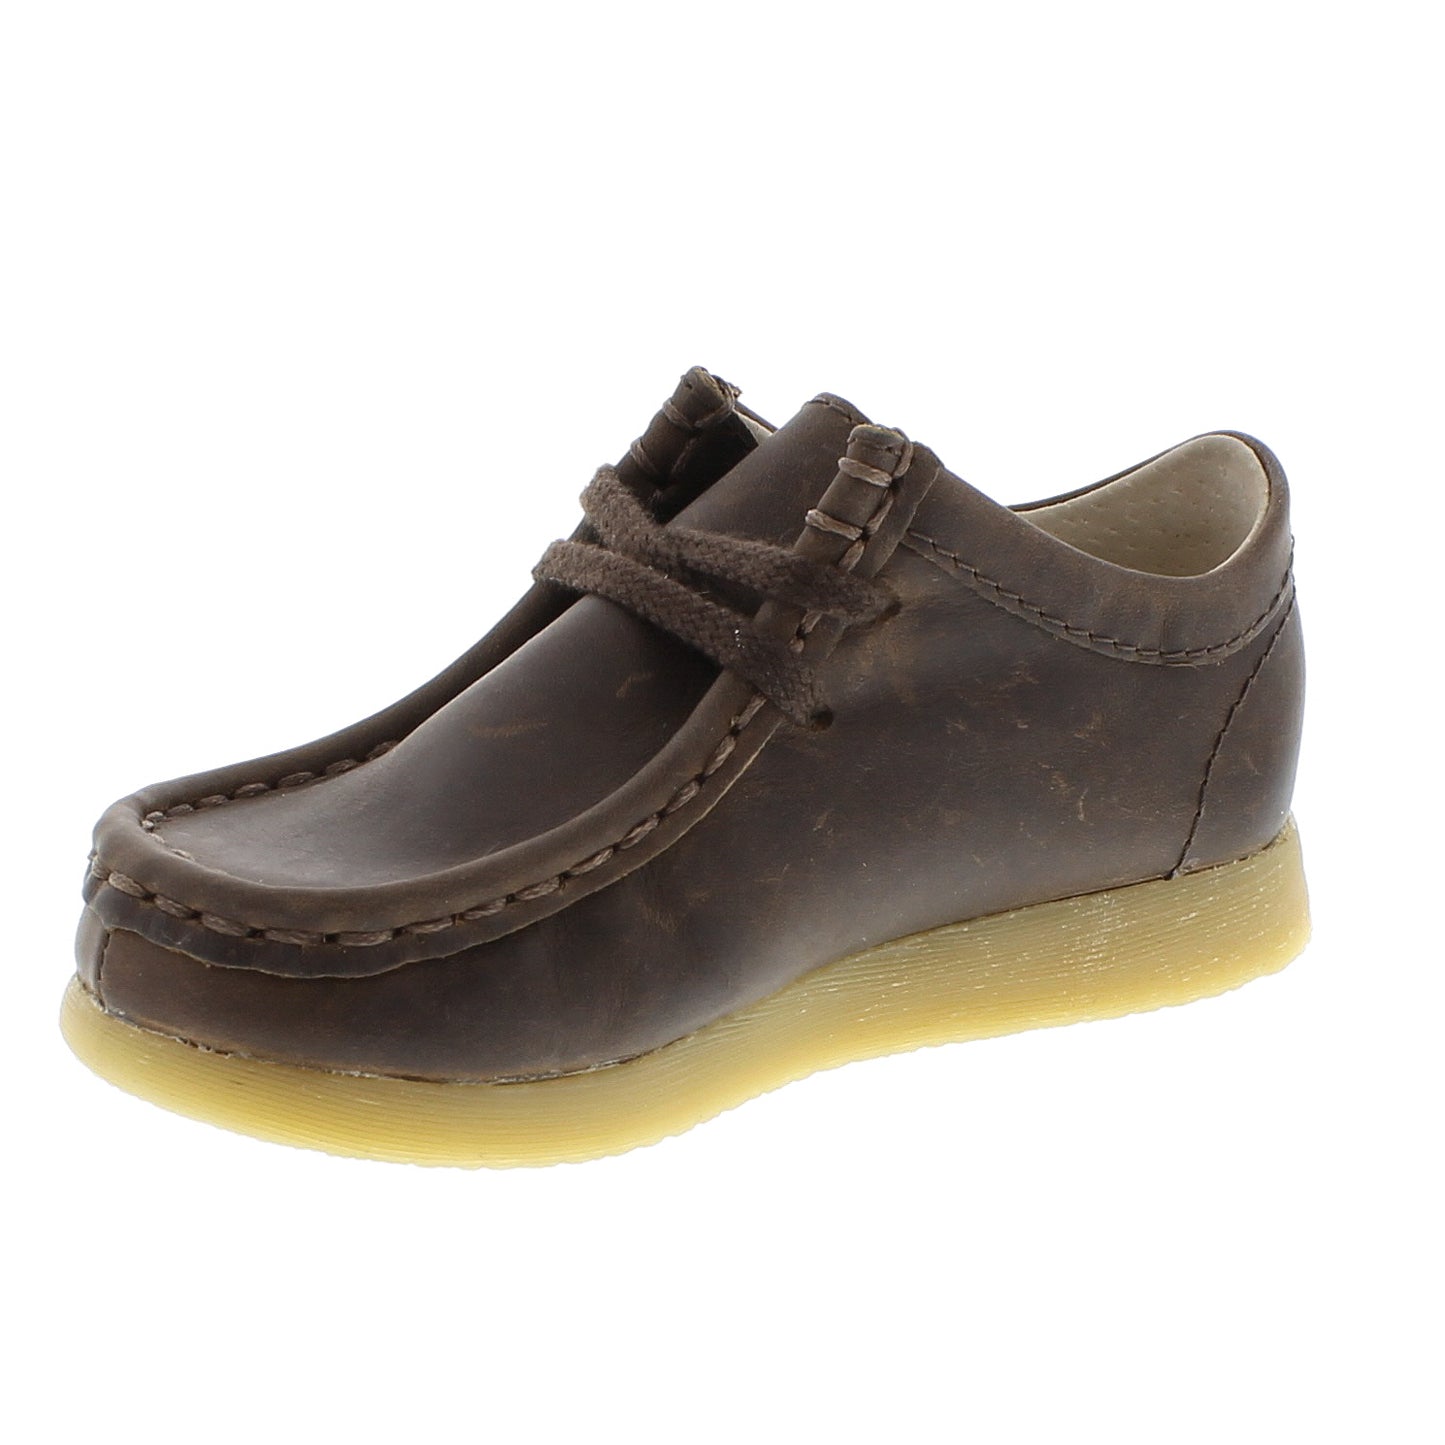 Wally Low Shoe - Brown Oiled